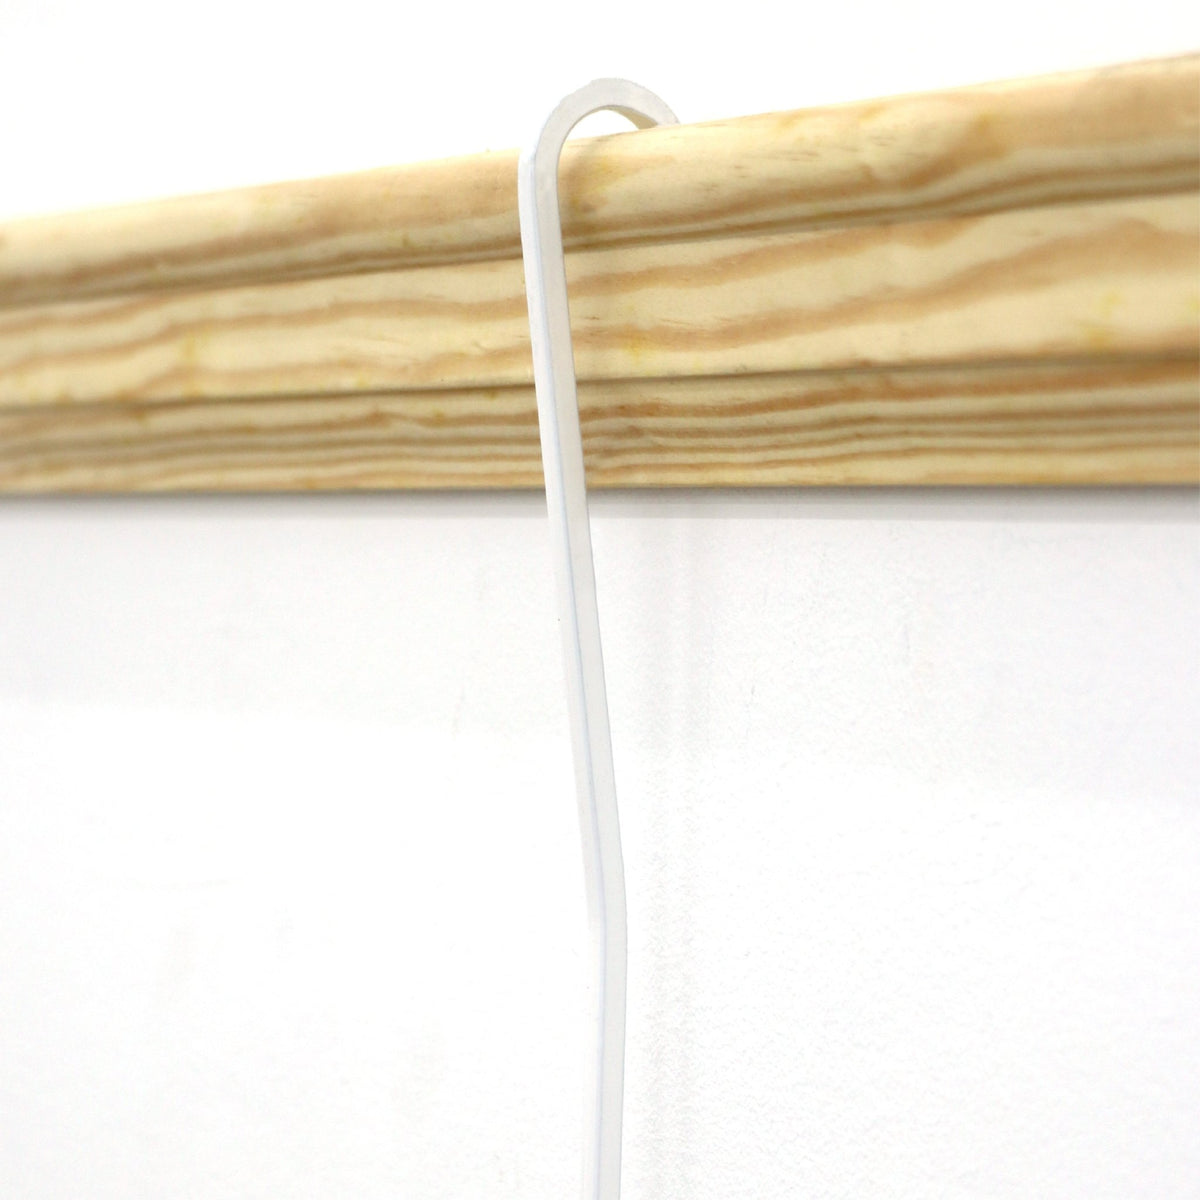 White Gallery Rod for Picture Rail Molding - 4 foot Rod for Hanging Multiple Frames and Photo Wall Collage - GS-OGRODW - Picture Hang Solutions